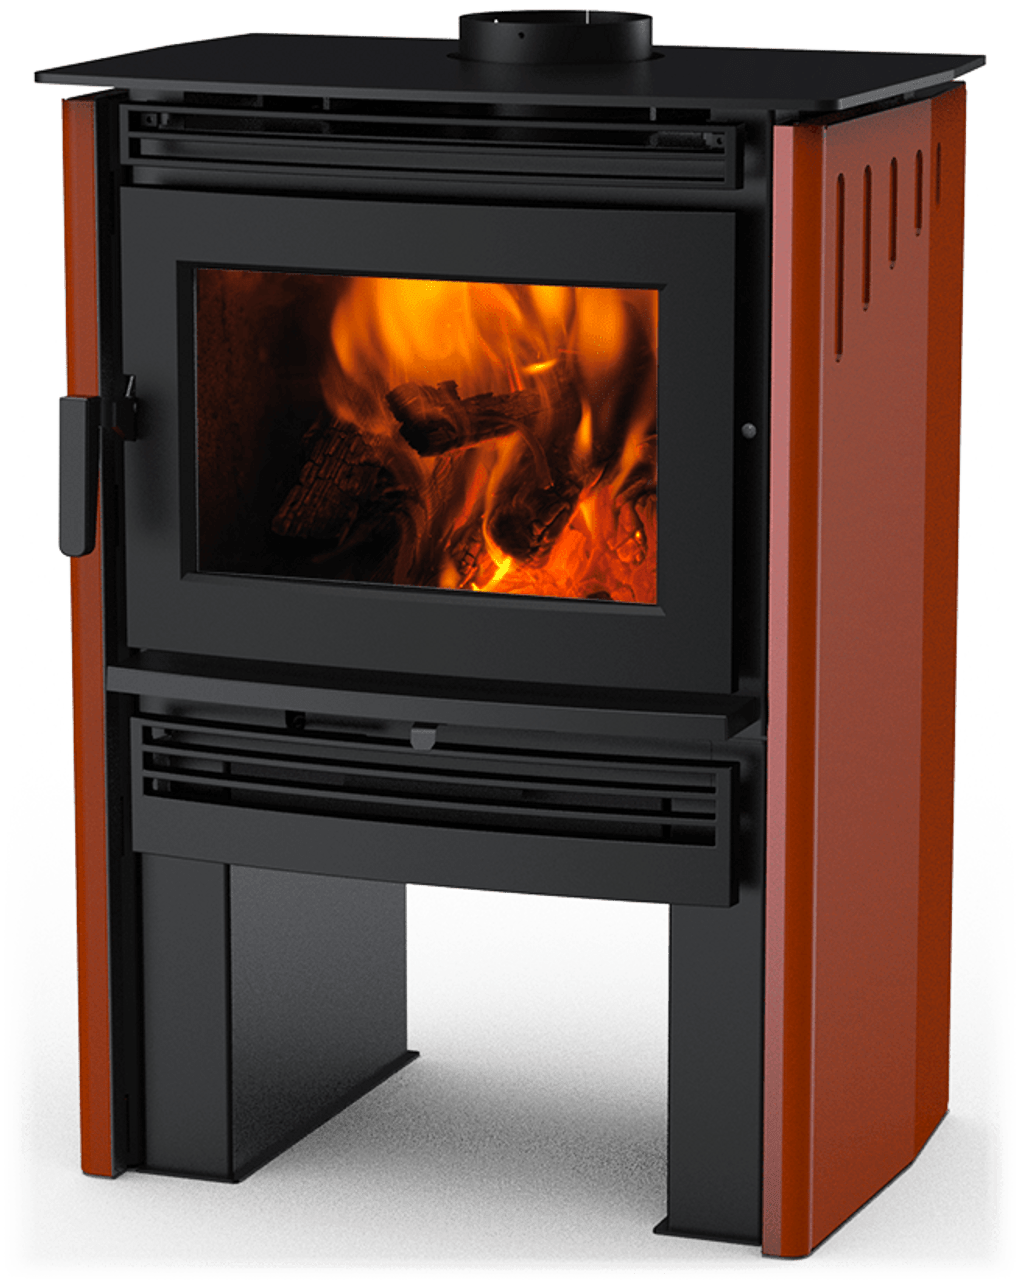 Pacific Energy Neo 2.5 LE Wood Stove